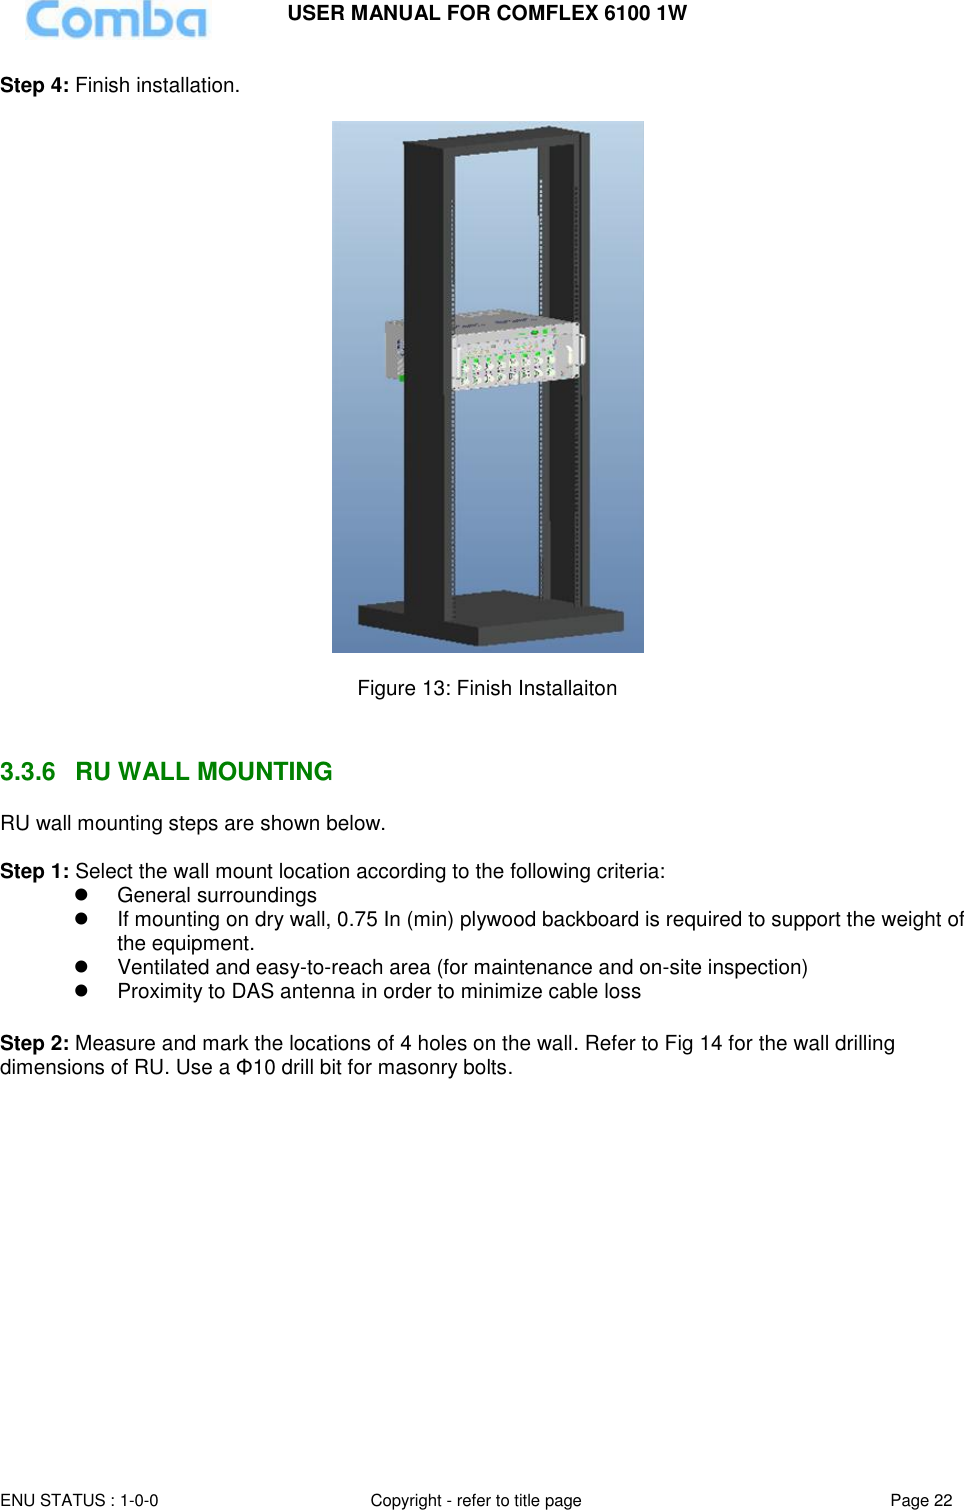 USER MANUAL FOR COMFLEX 6100 1W ENU STATUS : 1-0-0 Copyright - refer to title page Page 22  Step 4: Finish installation.    Figure 13: Finish Installaiton   3.3.6  RU WALL MOUNTING RU wall mounting steps are shown below.  Step 1: Select the wall mount location according to the following criteria:   General surroundings   If mounting on dry wall, 0.75 In (min) plywood backboard is required to support the weight of the equipment.   Ventilated and easy-to-reach area (for maintenance and on-site inspection)   Proximity to DAS antenna in order to minimize cable loss  Step 2: Measure and mark the locations of 4 holes on the wall. Refer to Fig 14 for the wall drilling dimensions of RU. Use a Φ10 drill bit for masonry bolts.  